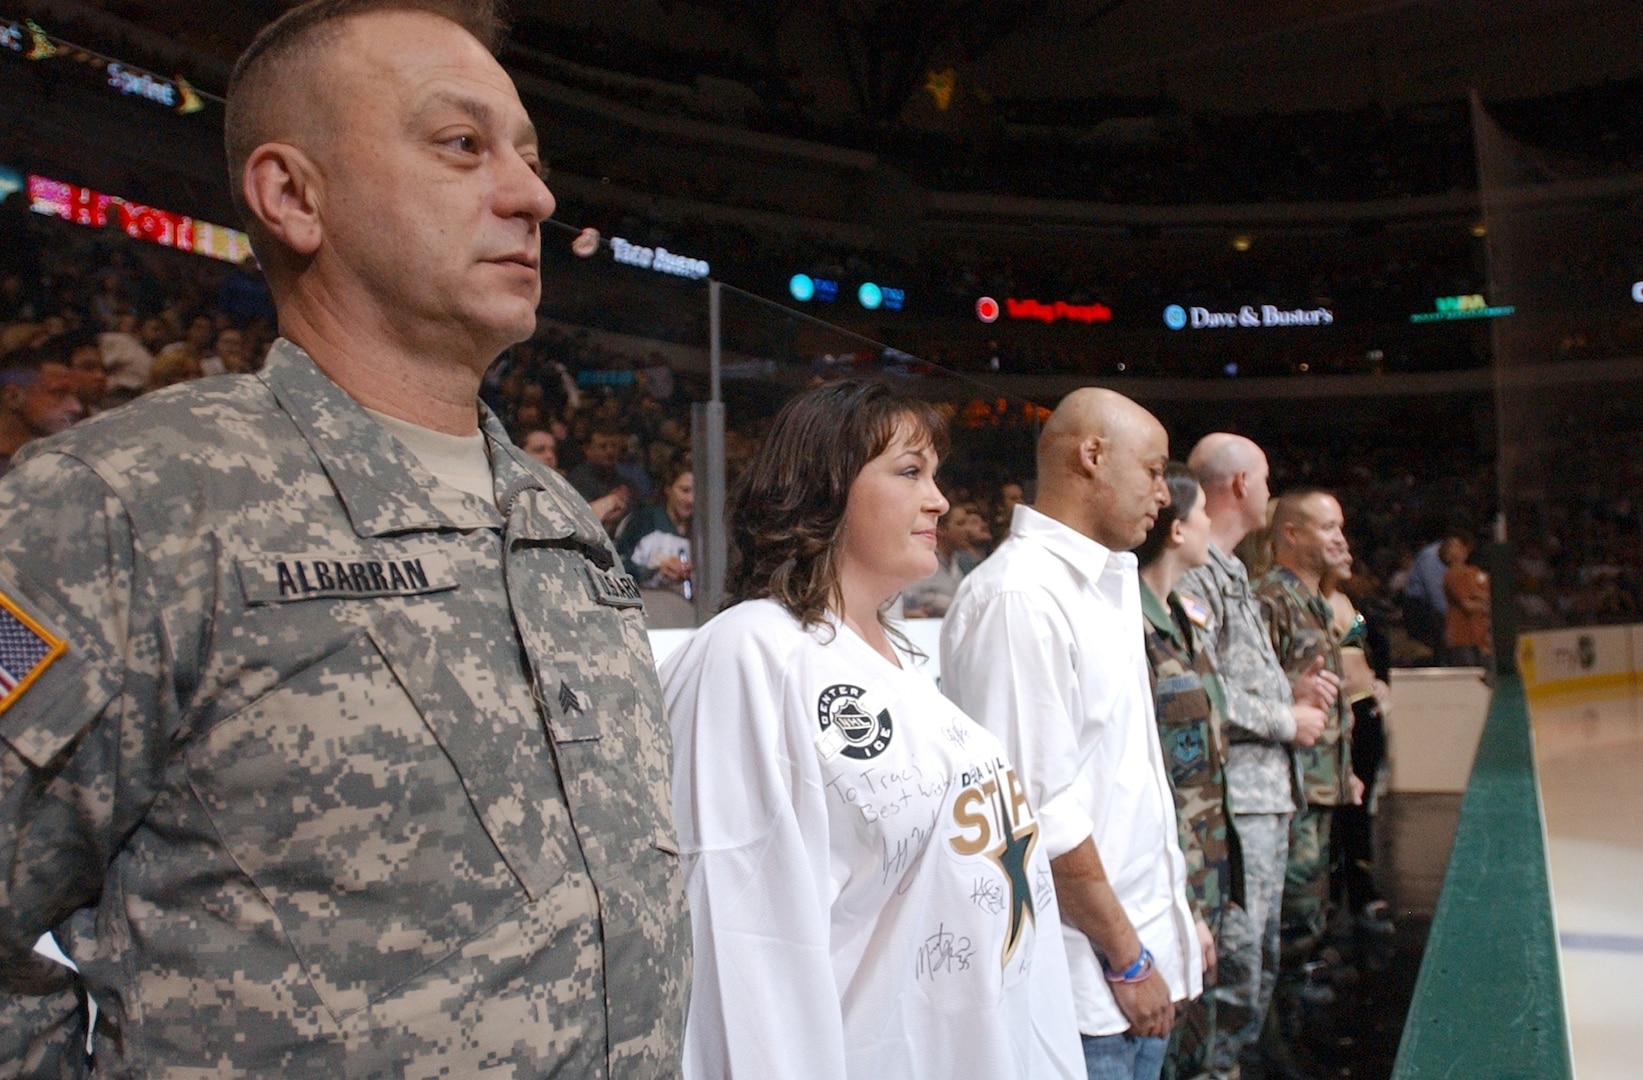 RANDOLPH AIR FORCE BASE, Texas - Sergeant Kenneth Albarran (left), a war veteran undergoing treatment at Brooke Army Medical Center, and several other San Antonio military members and veterans stand as they are recognized in between periods at a Dallas Stars hockey home game Feb. 23. (U.S. Air Force photo by Staff Sgt. Beth Del Vecchio)                               